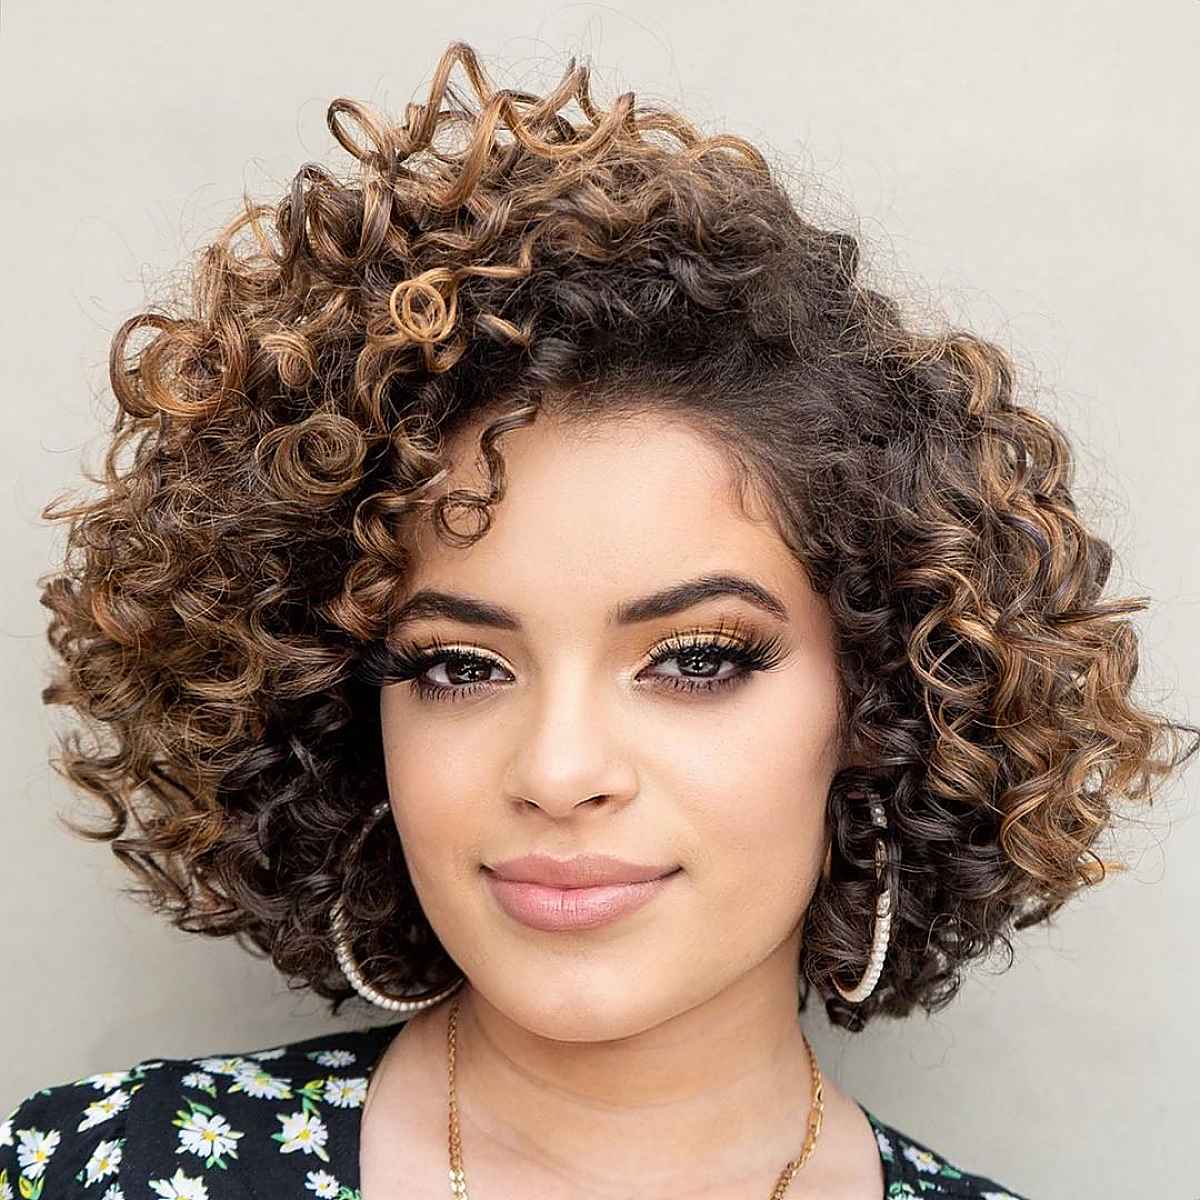 Short curly brunette hair with lob